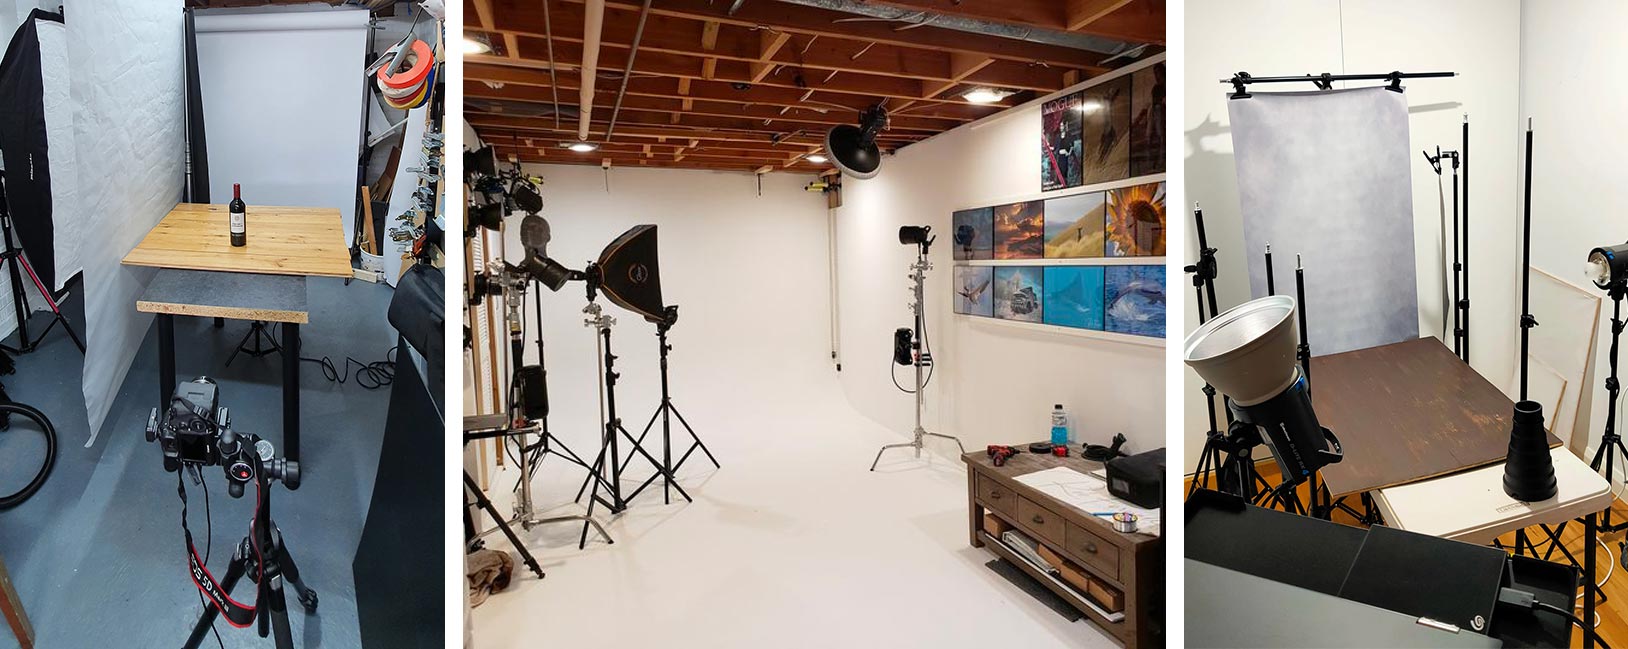 How to Set Up Your Home Photography Studio